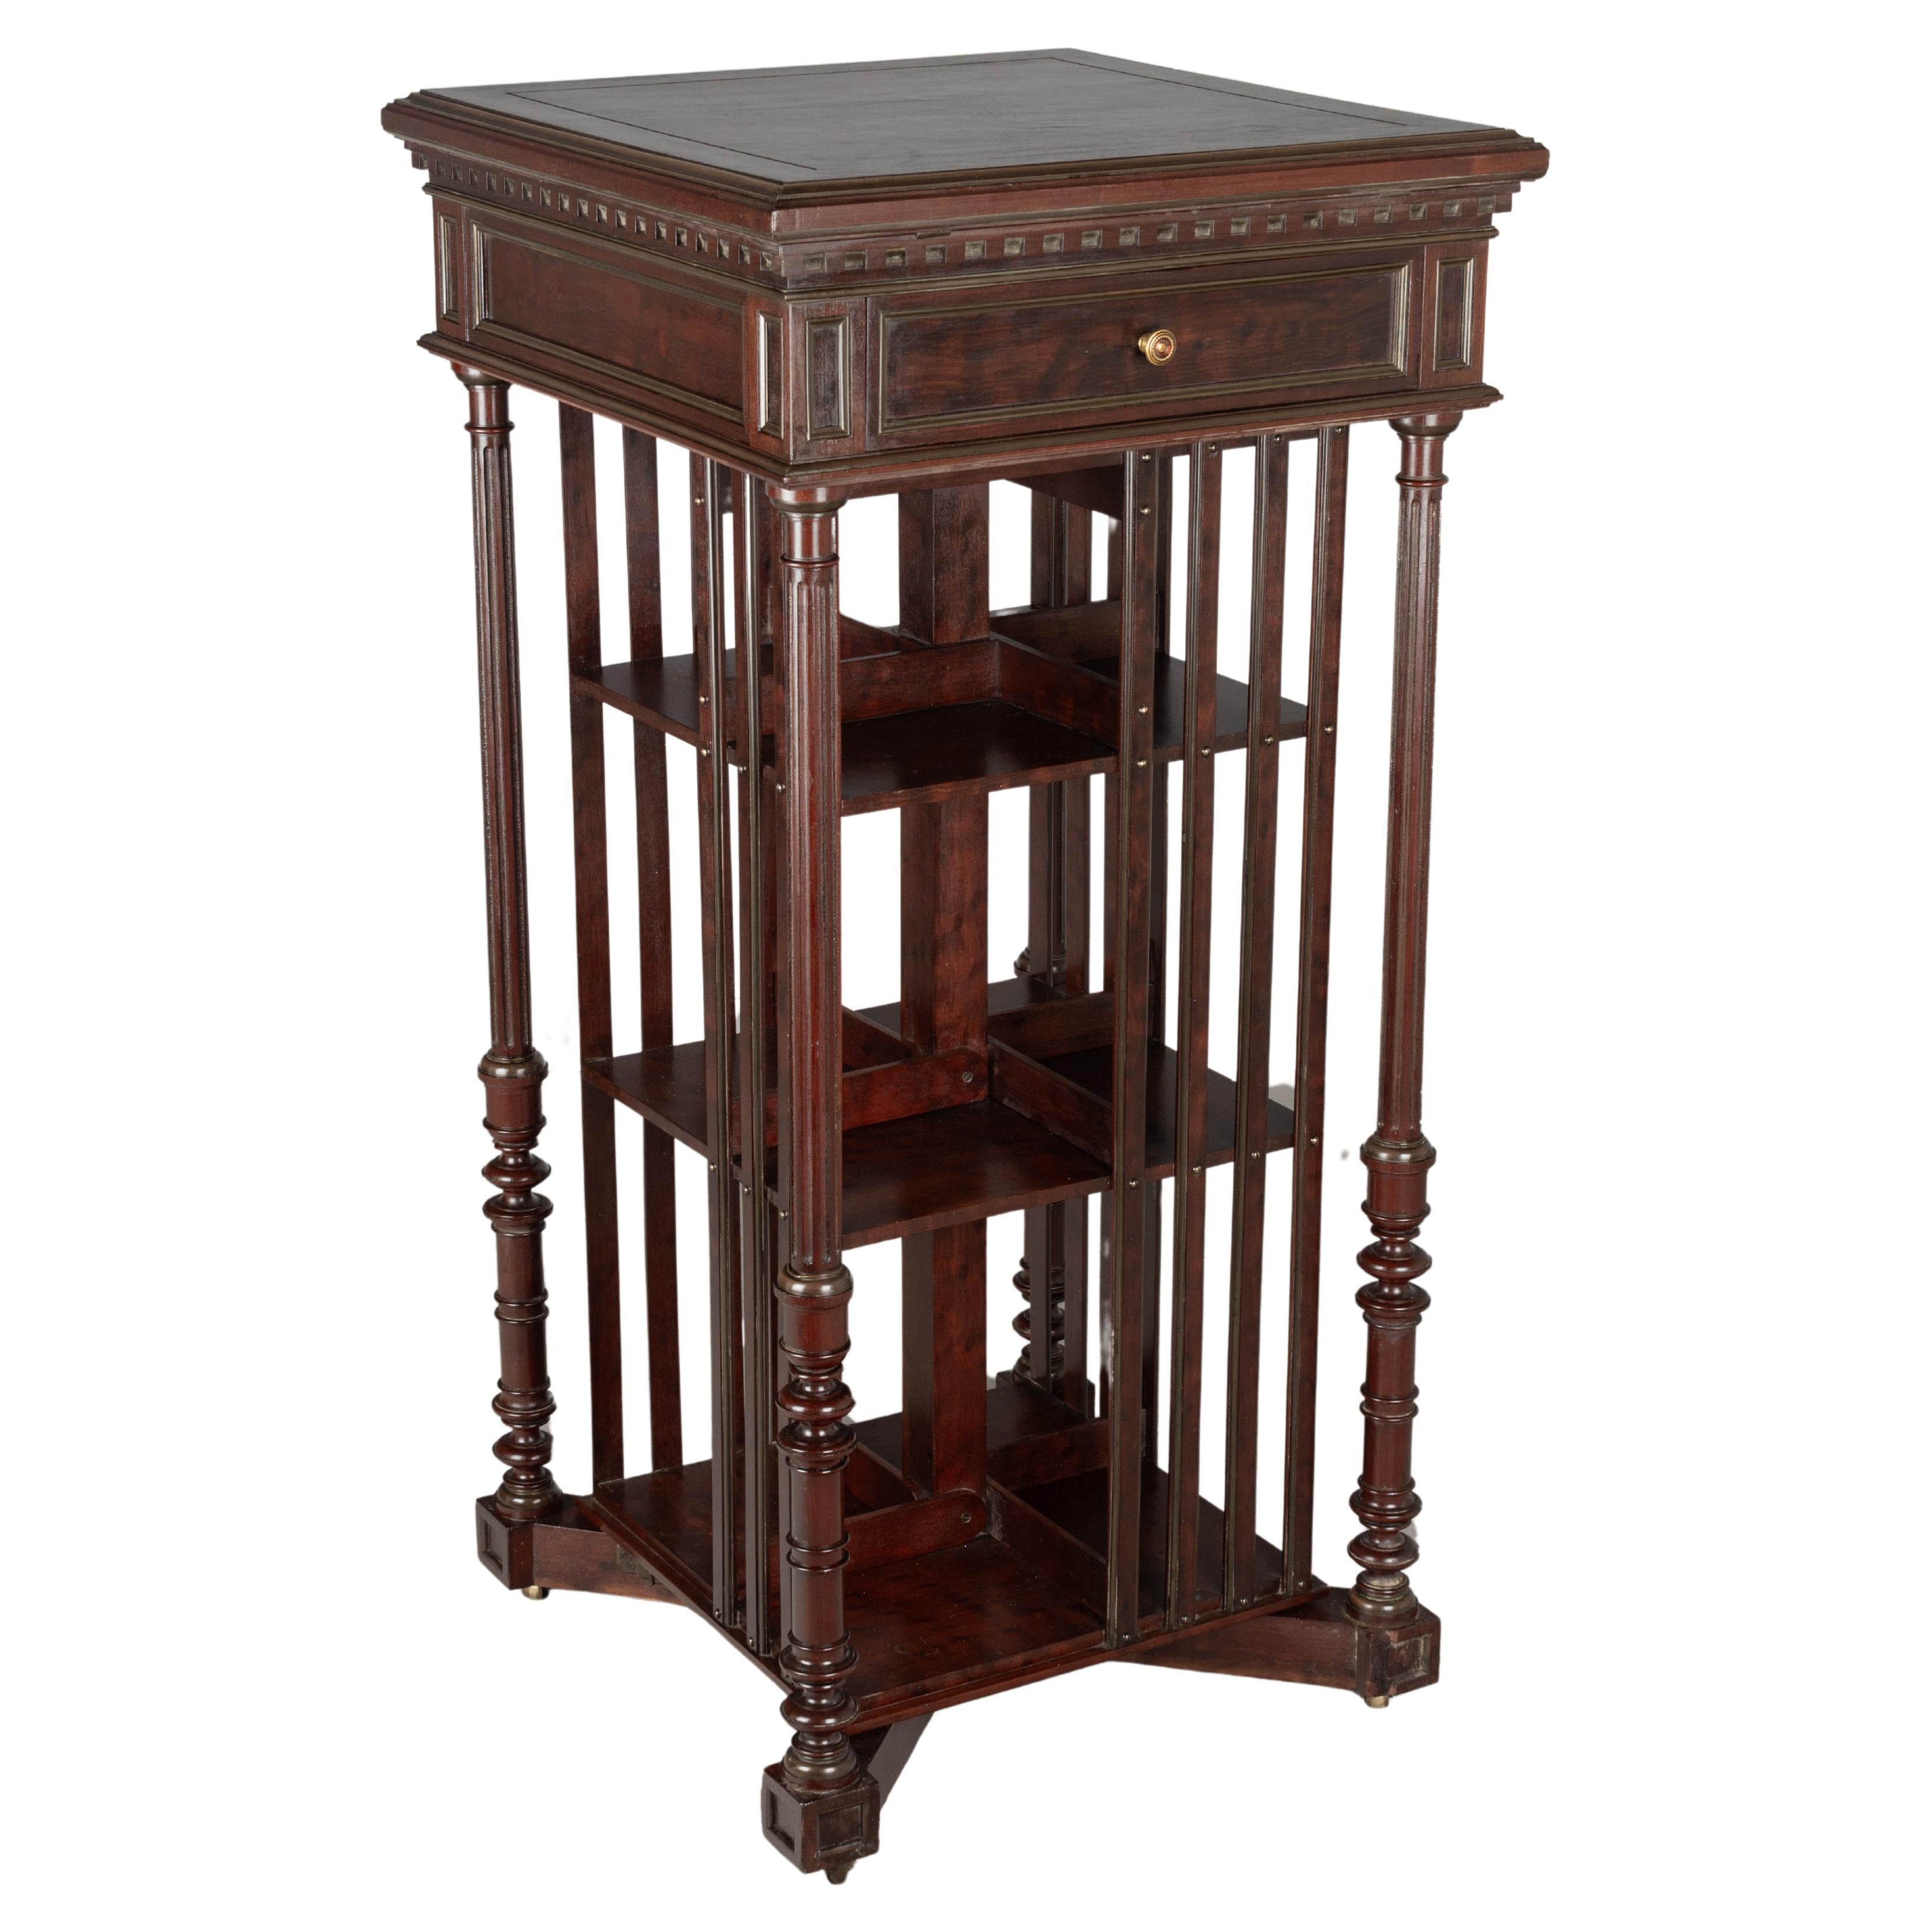 19th Century French Rotating Bookcase by Terquem, Paris